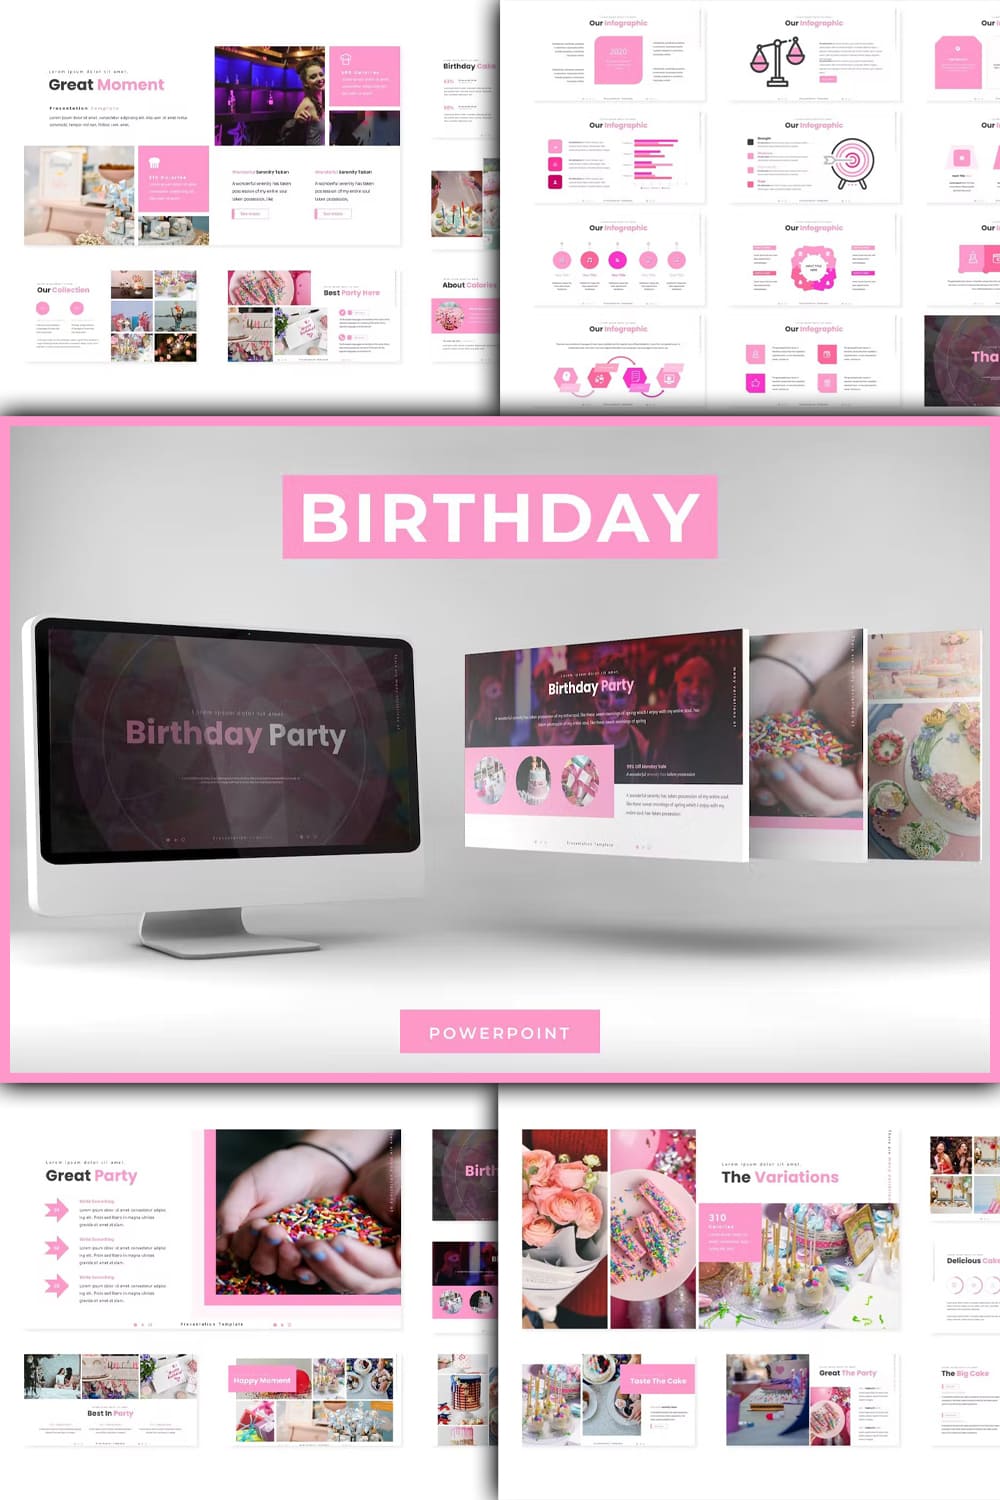 Birthday party powerpoint template - pinterest image preview.